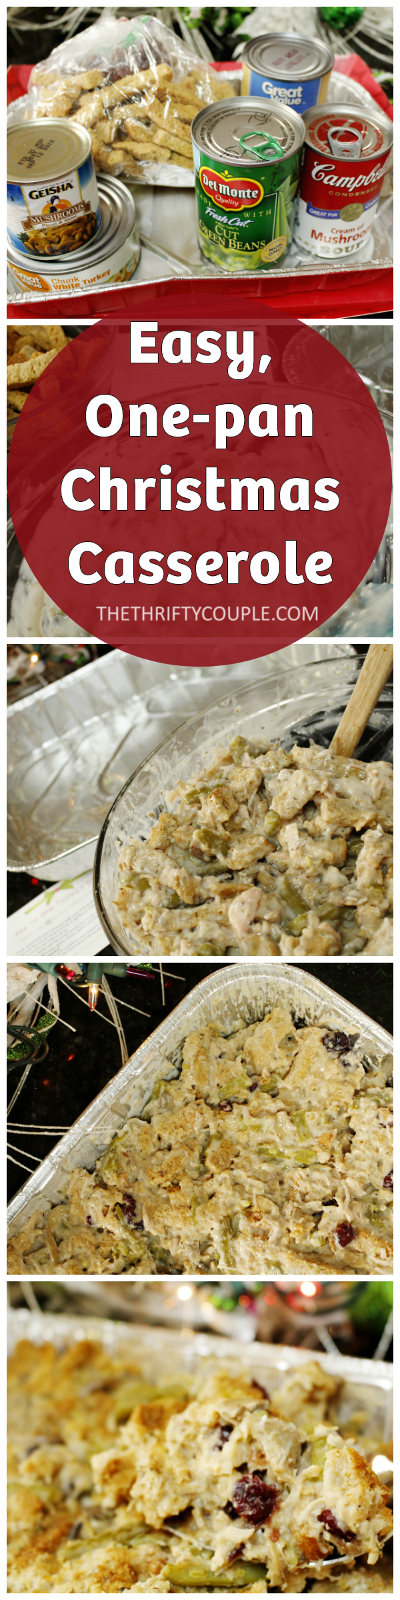 easy-one-pan-christmas-casserole-gift-idea-with-free-printables